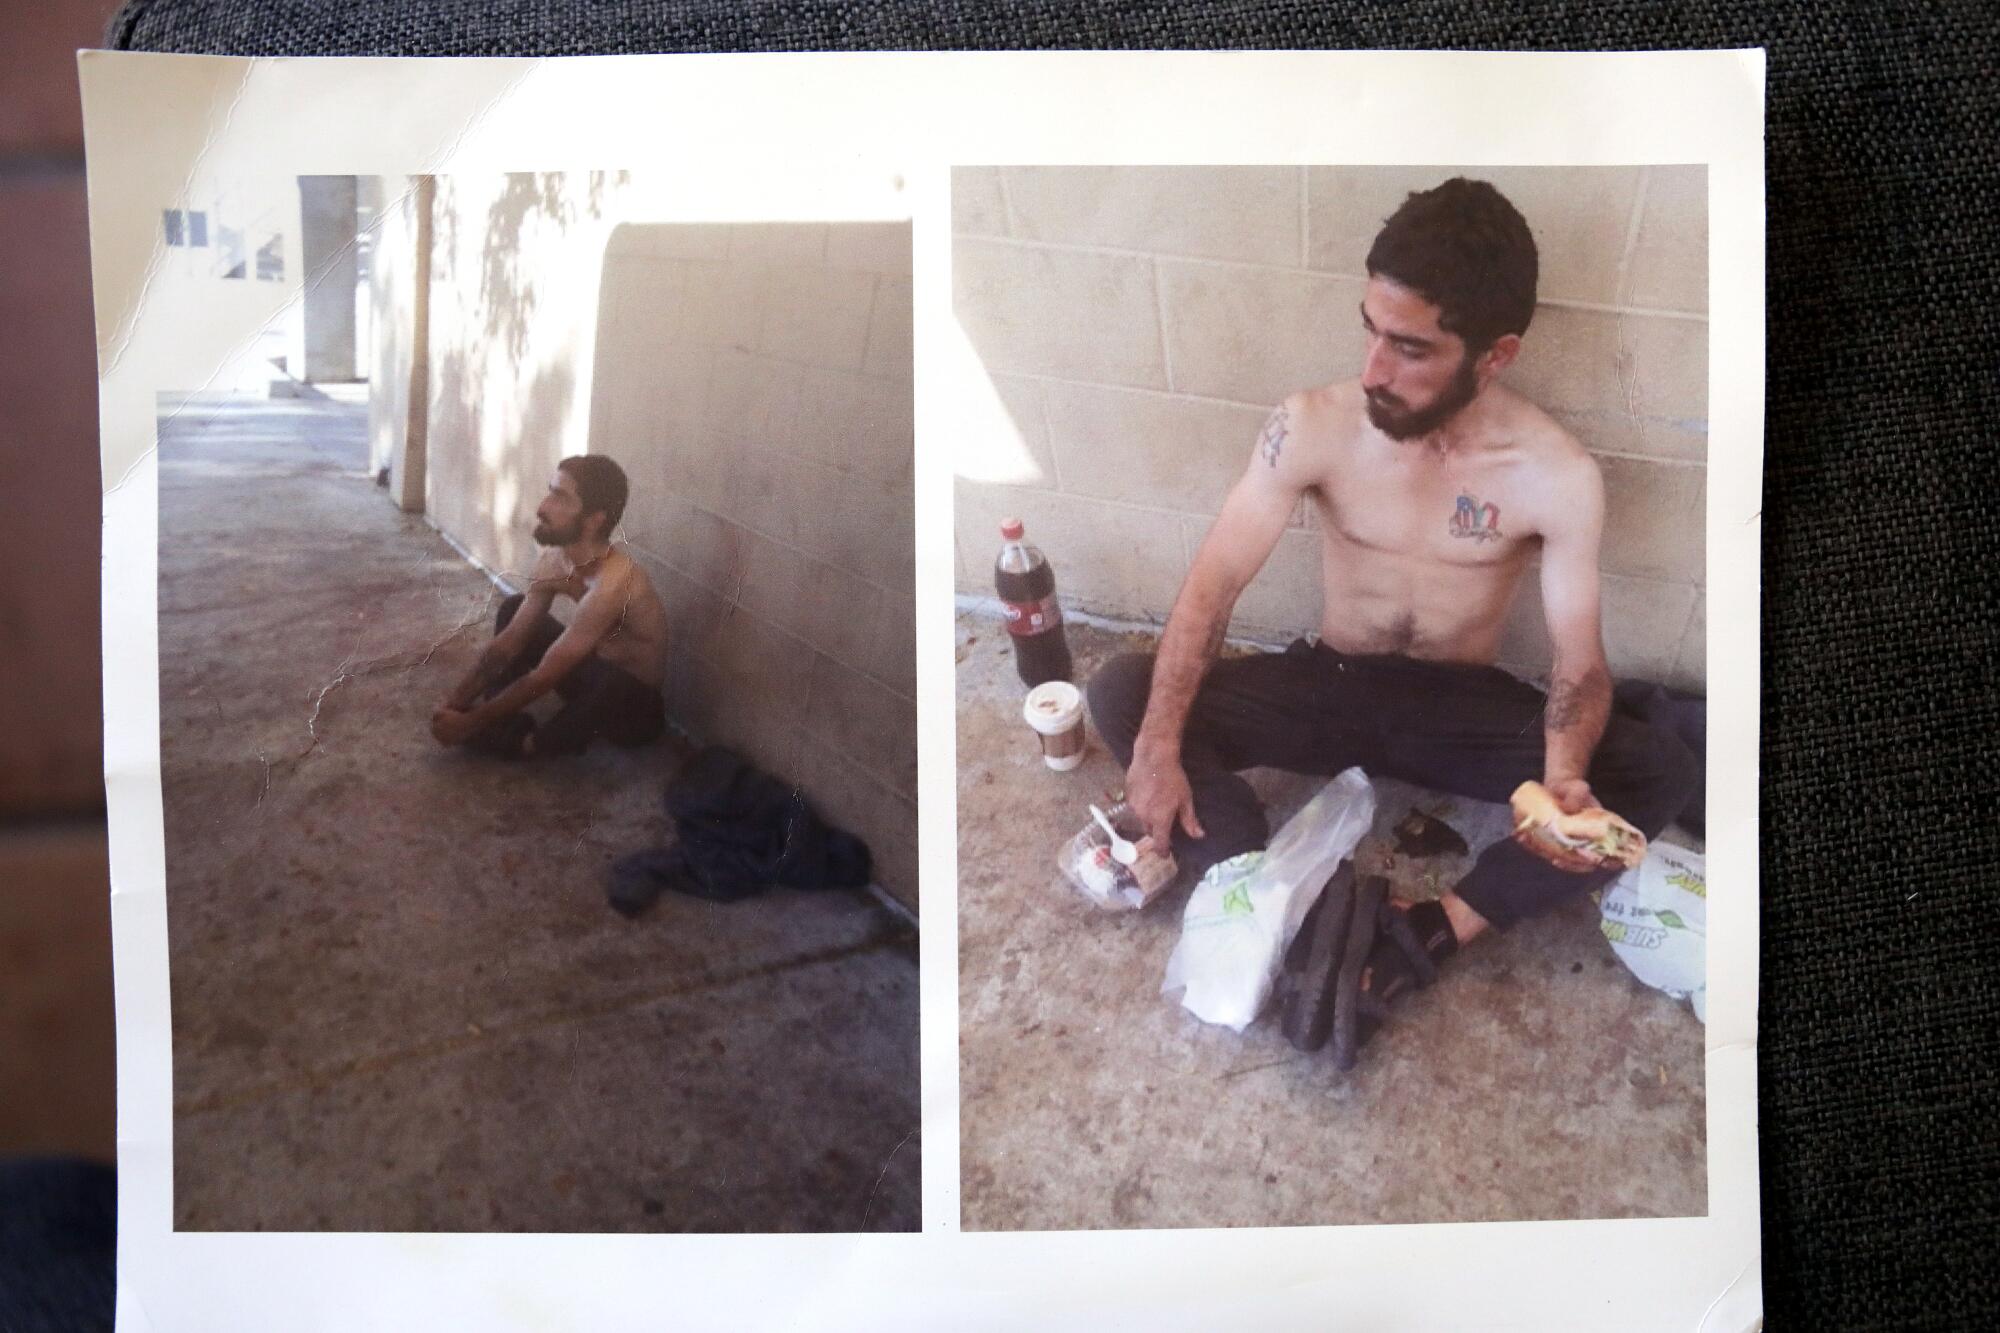 Two photos of a man sitting on a sidewalk eating